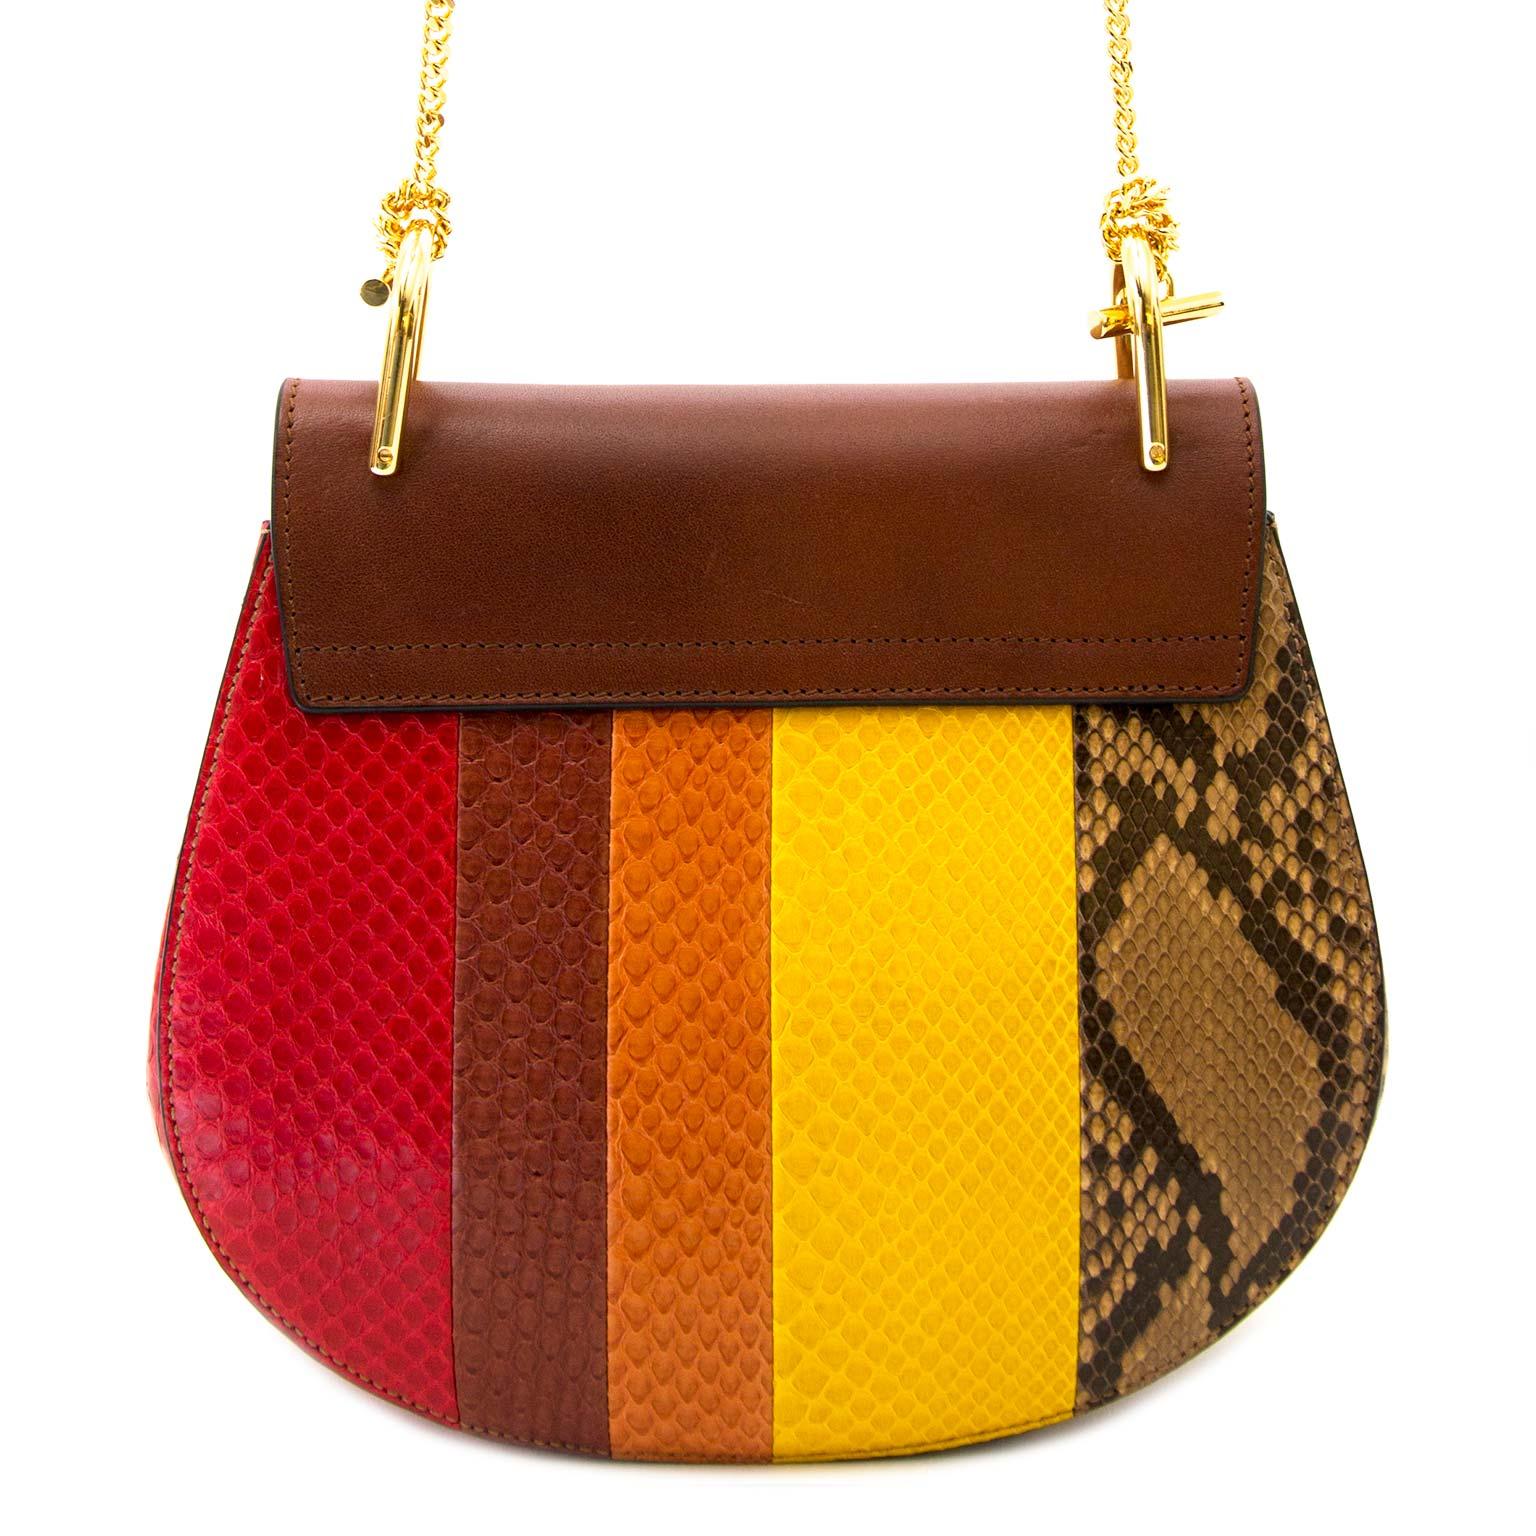 Brand New!

Chloé Drew Multicolor Python Crossbody Bag

In 2015, Under the direction of Clare Waight Keller, Chloé has released the must-have handbag of that year: The Drew!

This romantic, sophisticated reinvention of the Saddle Bag was seen all